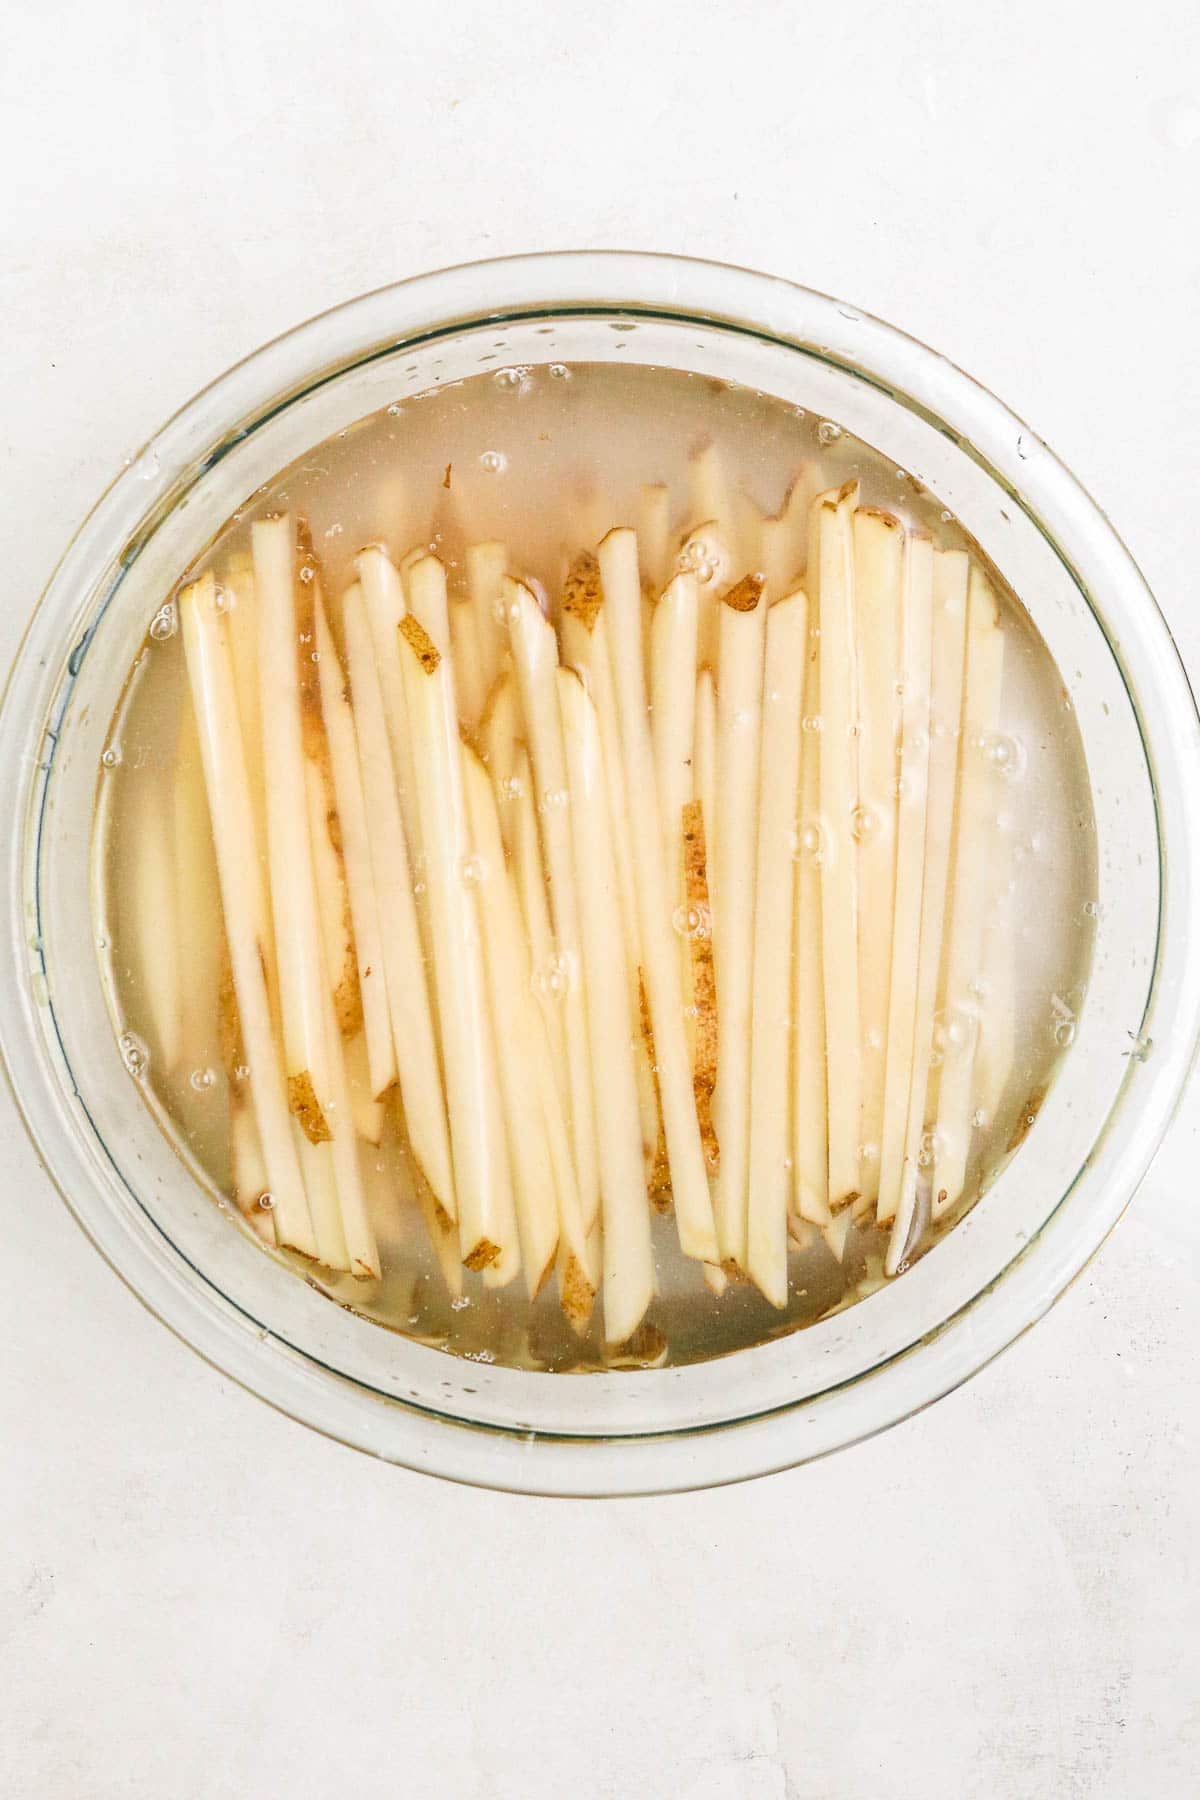 uncooked fries in a clear bowl full of water.